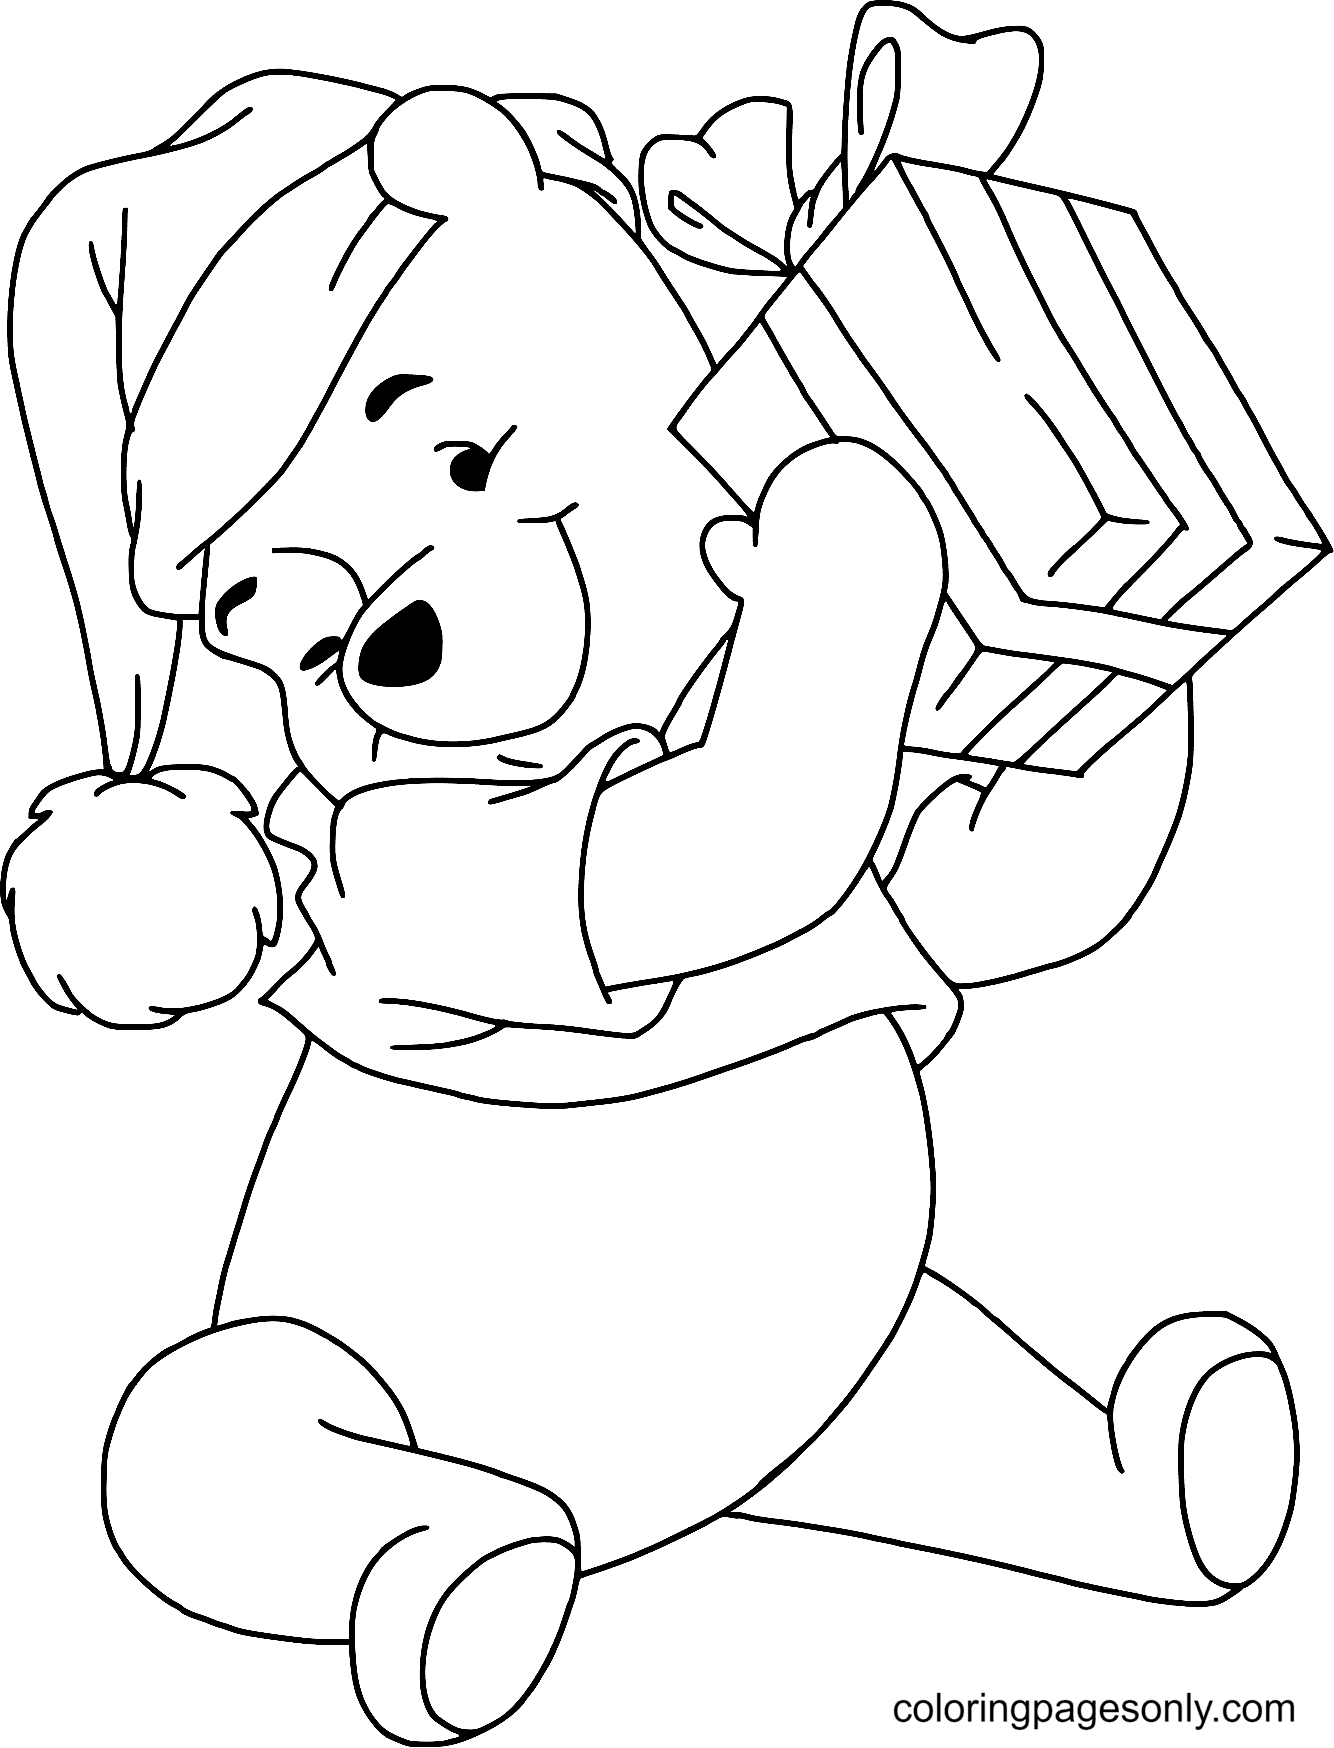 Winnie Present Coloring Page